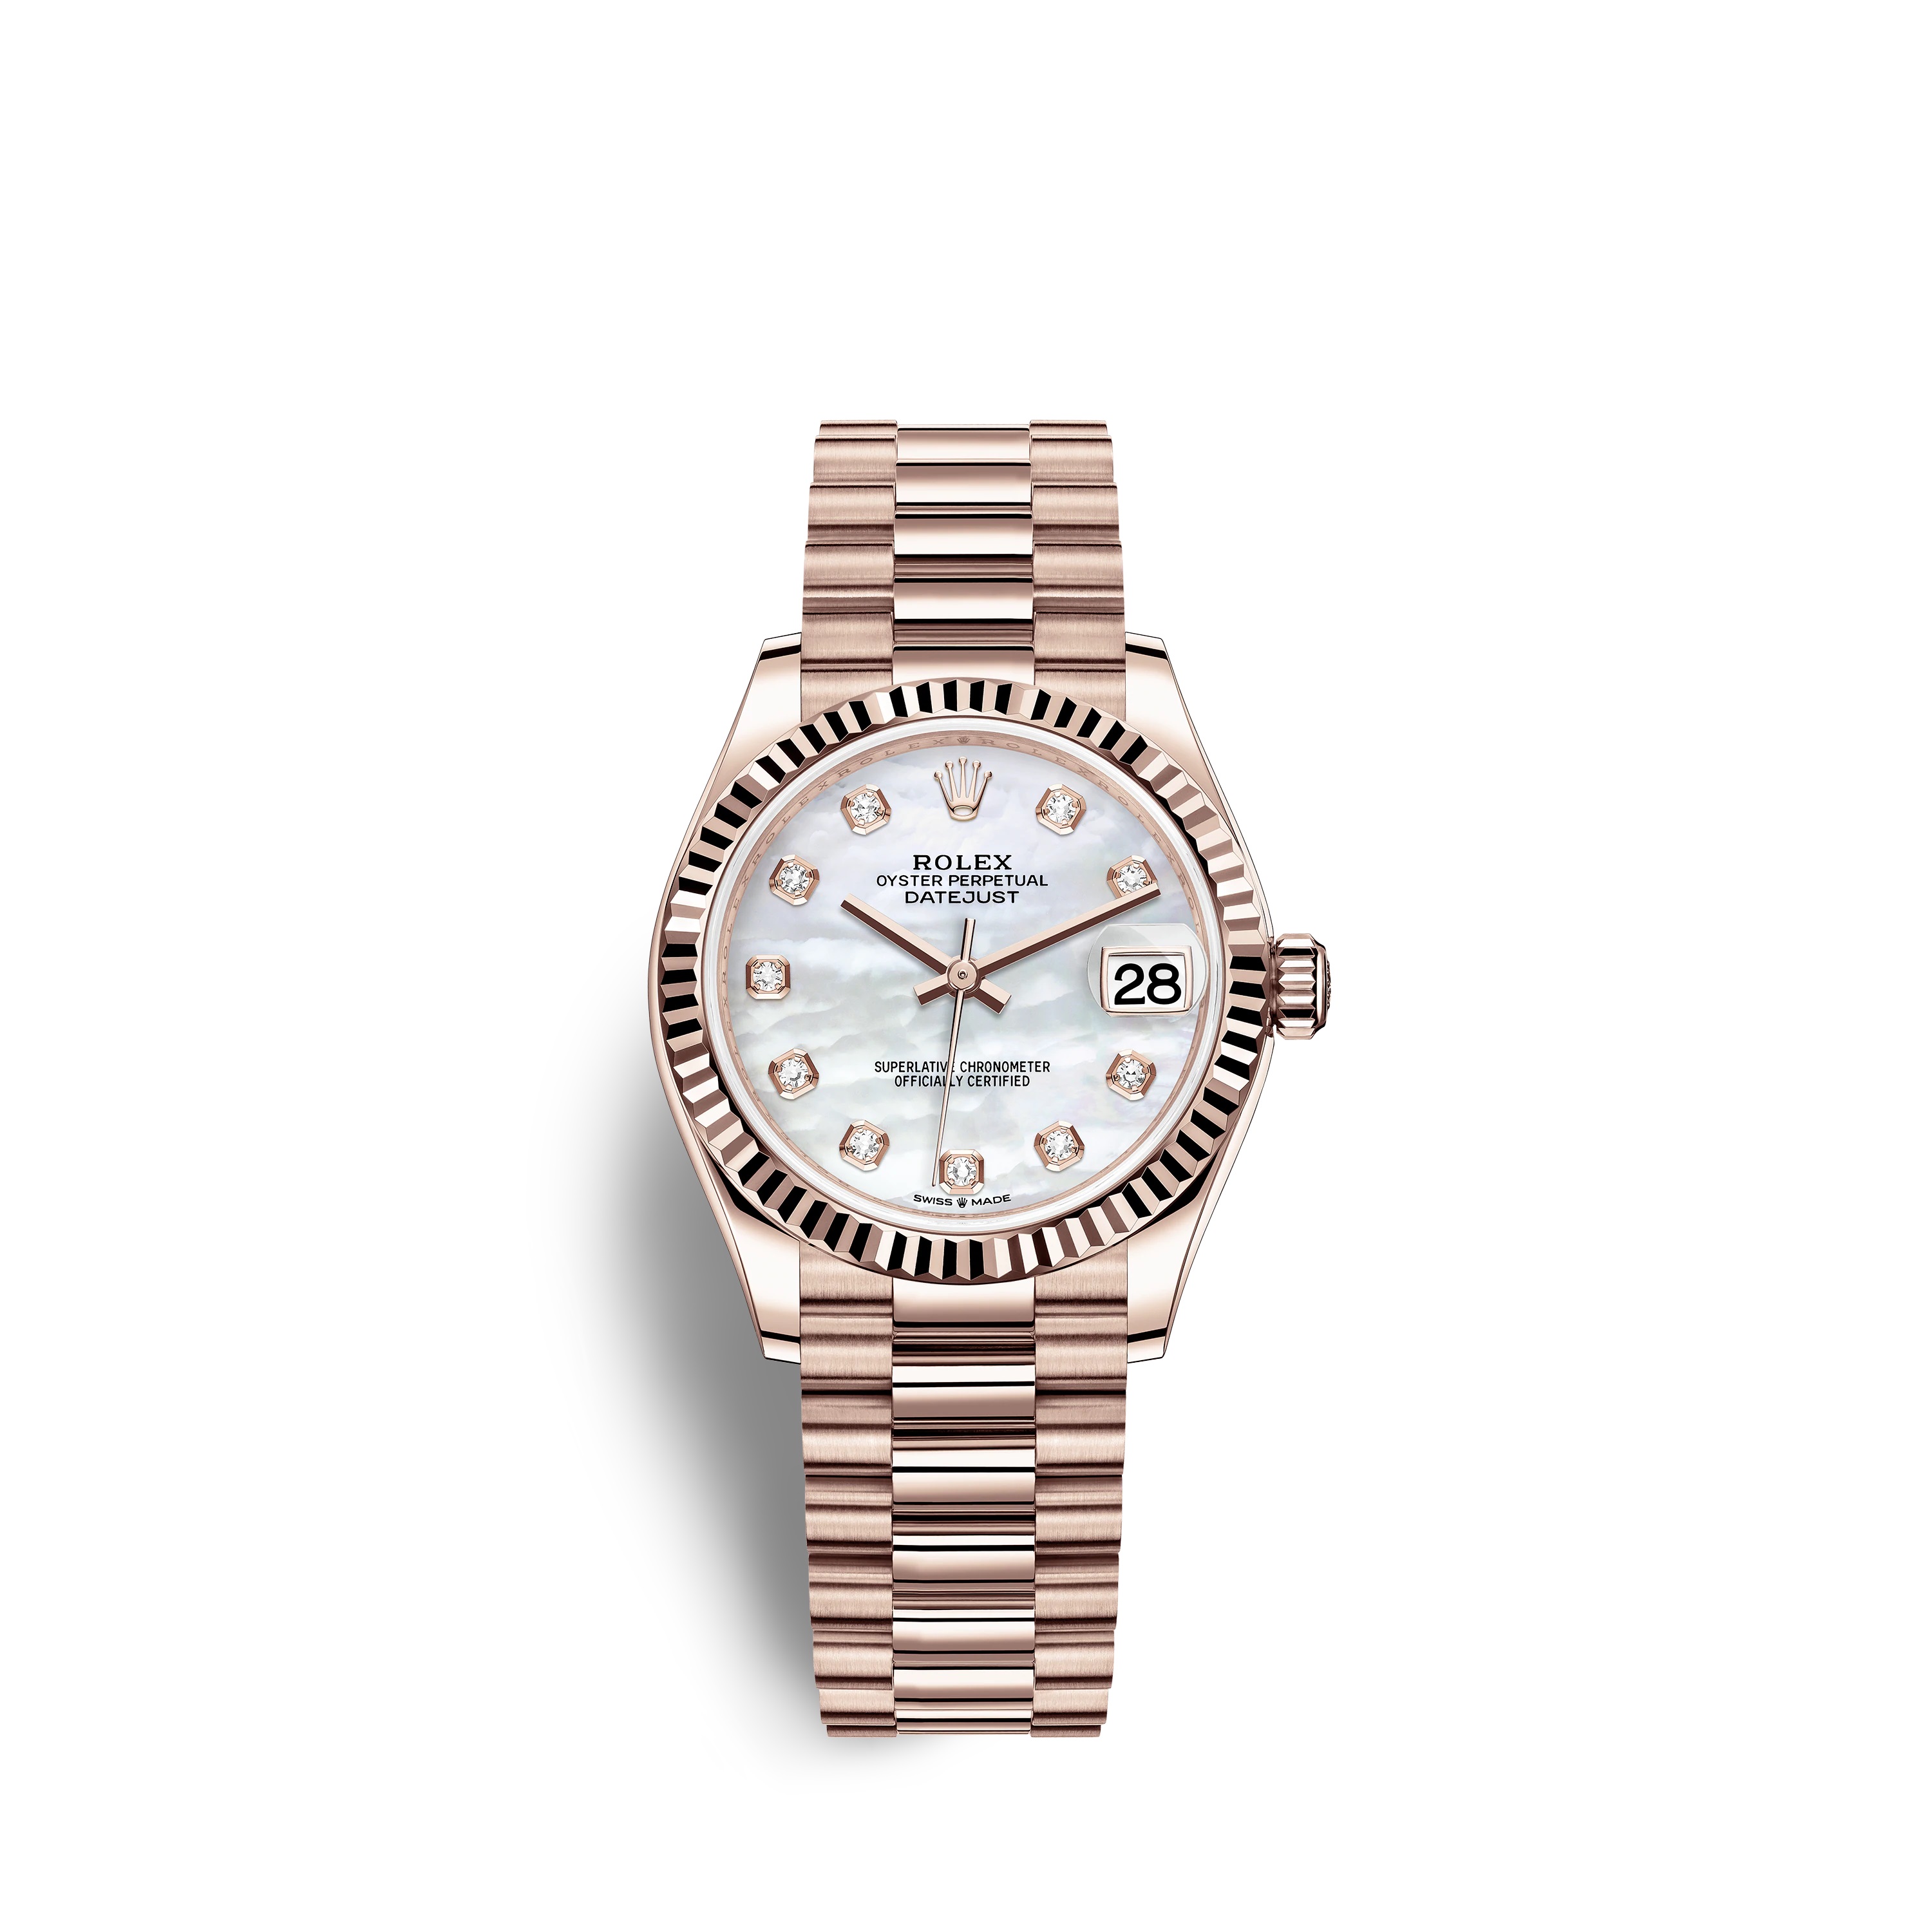 Datejust 31 278275 Rose Gold Watch (White Mother-of-Pearl Set with Diamonds)